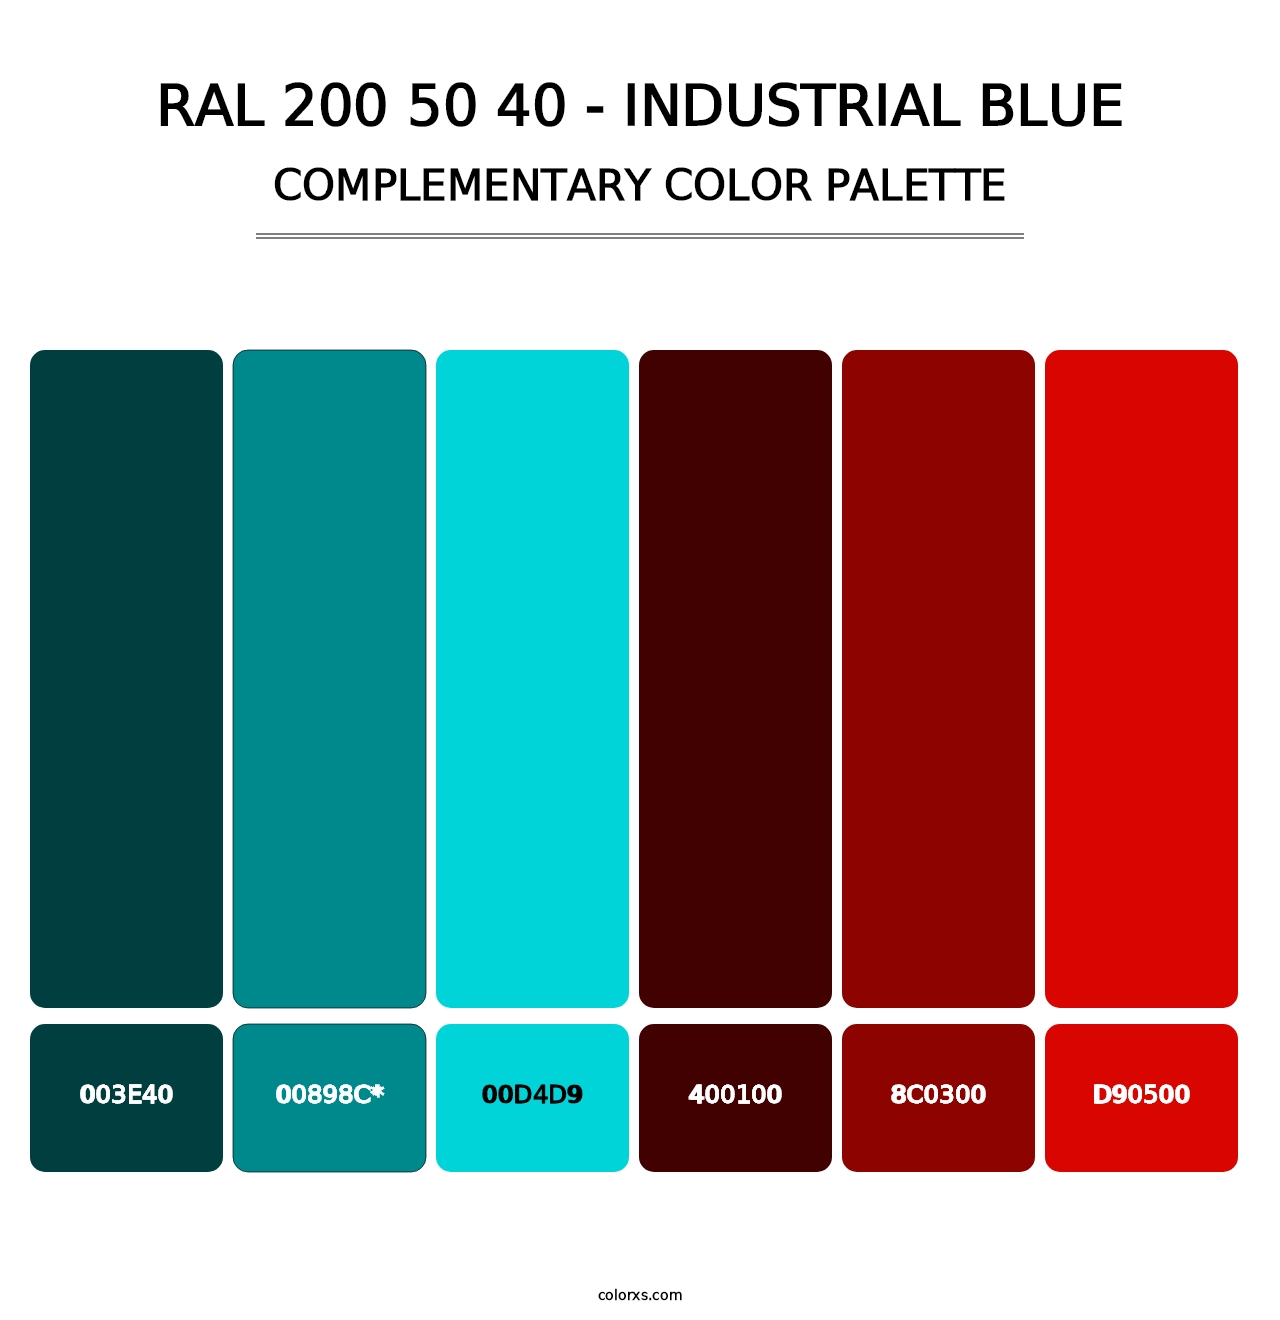 RAL 200 50 40 - Industrial Blue - Complementary Color Palette